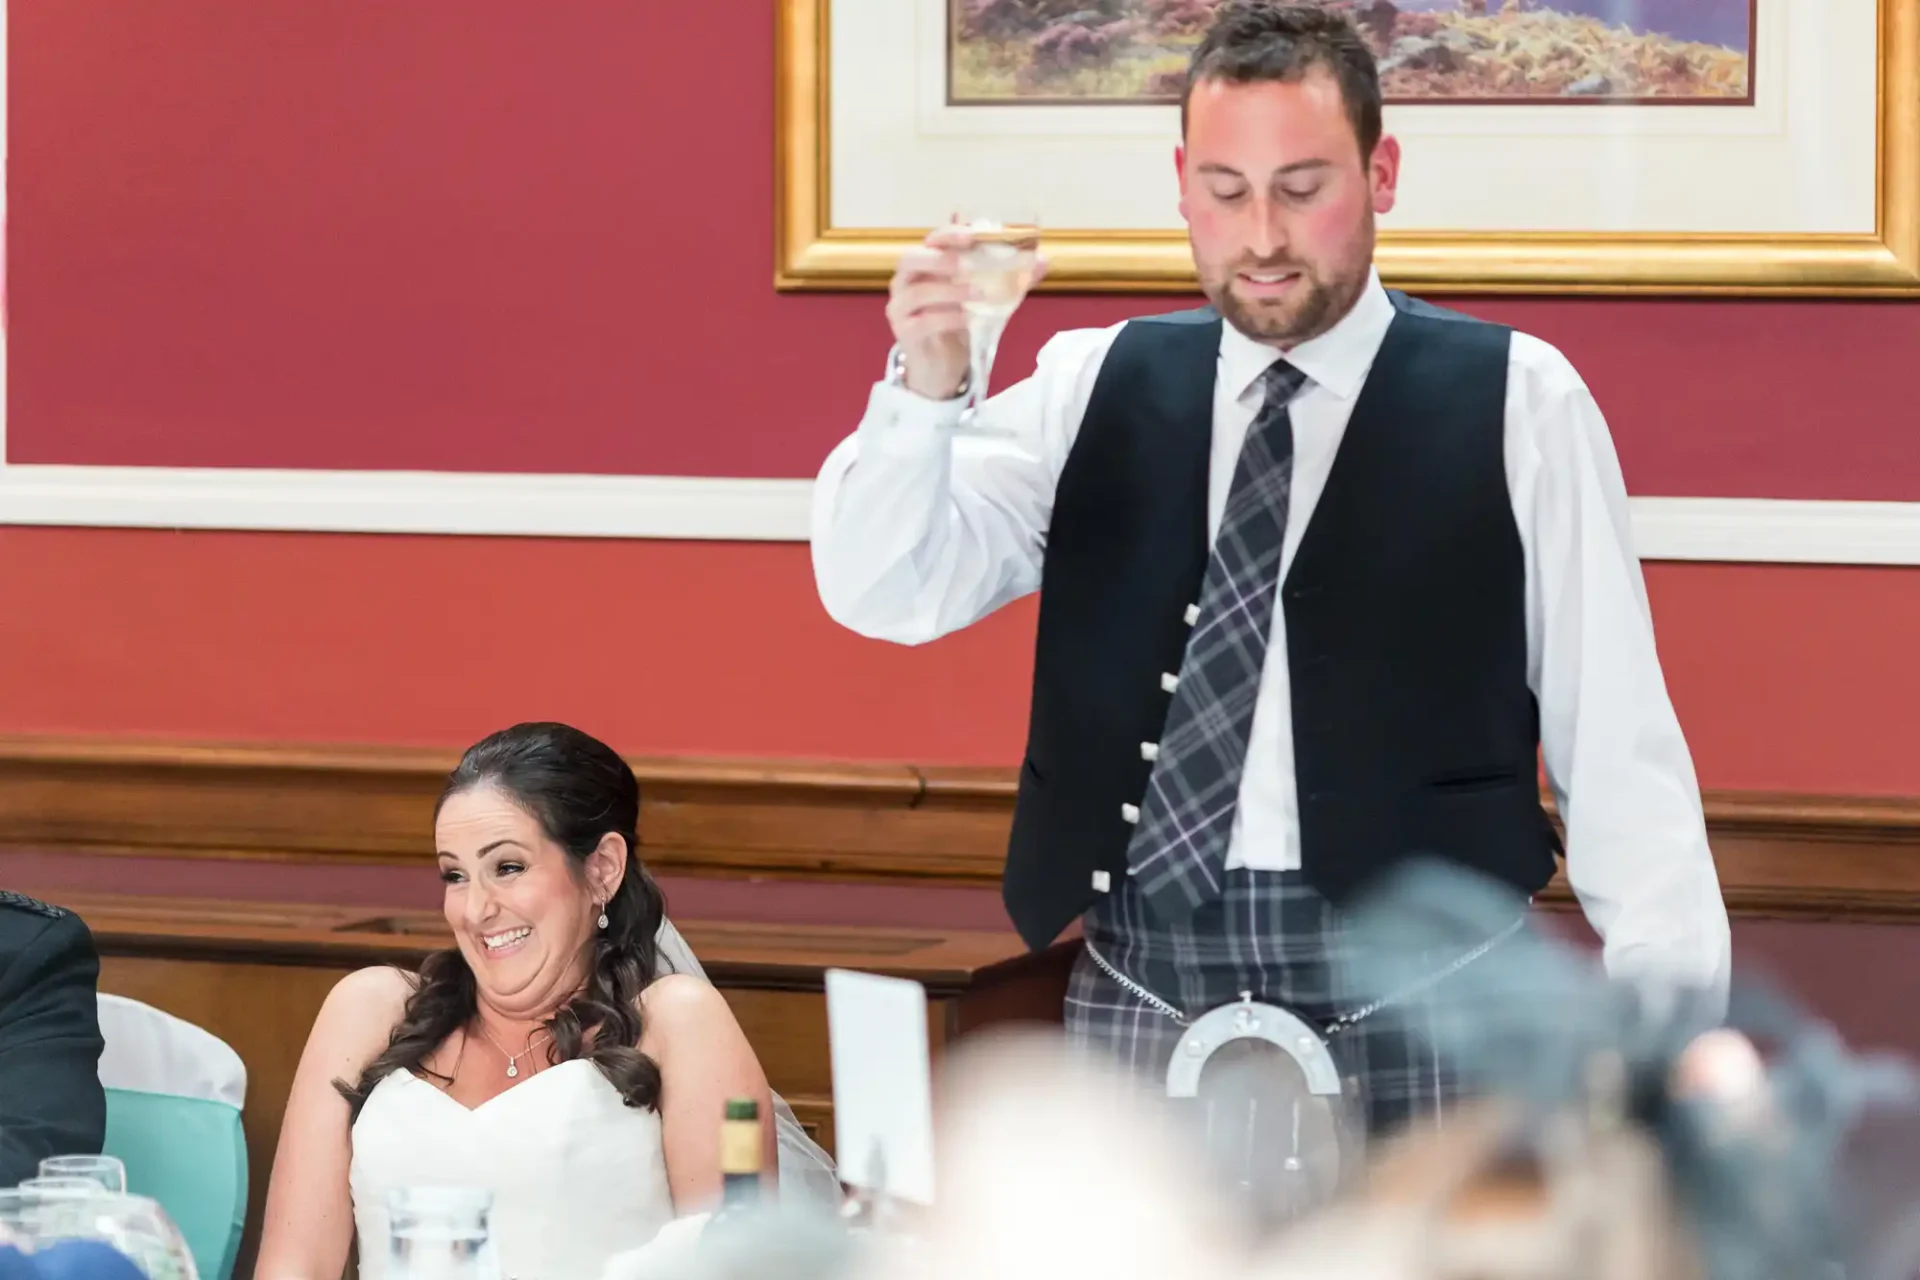 Man in a kilt and vest toasting with a glass, seated woman in a white dress smiling at a table during a wedding reception.